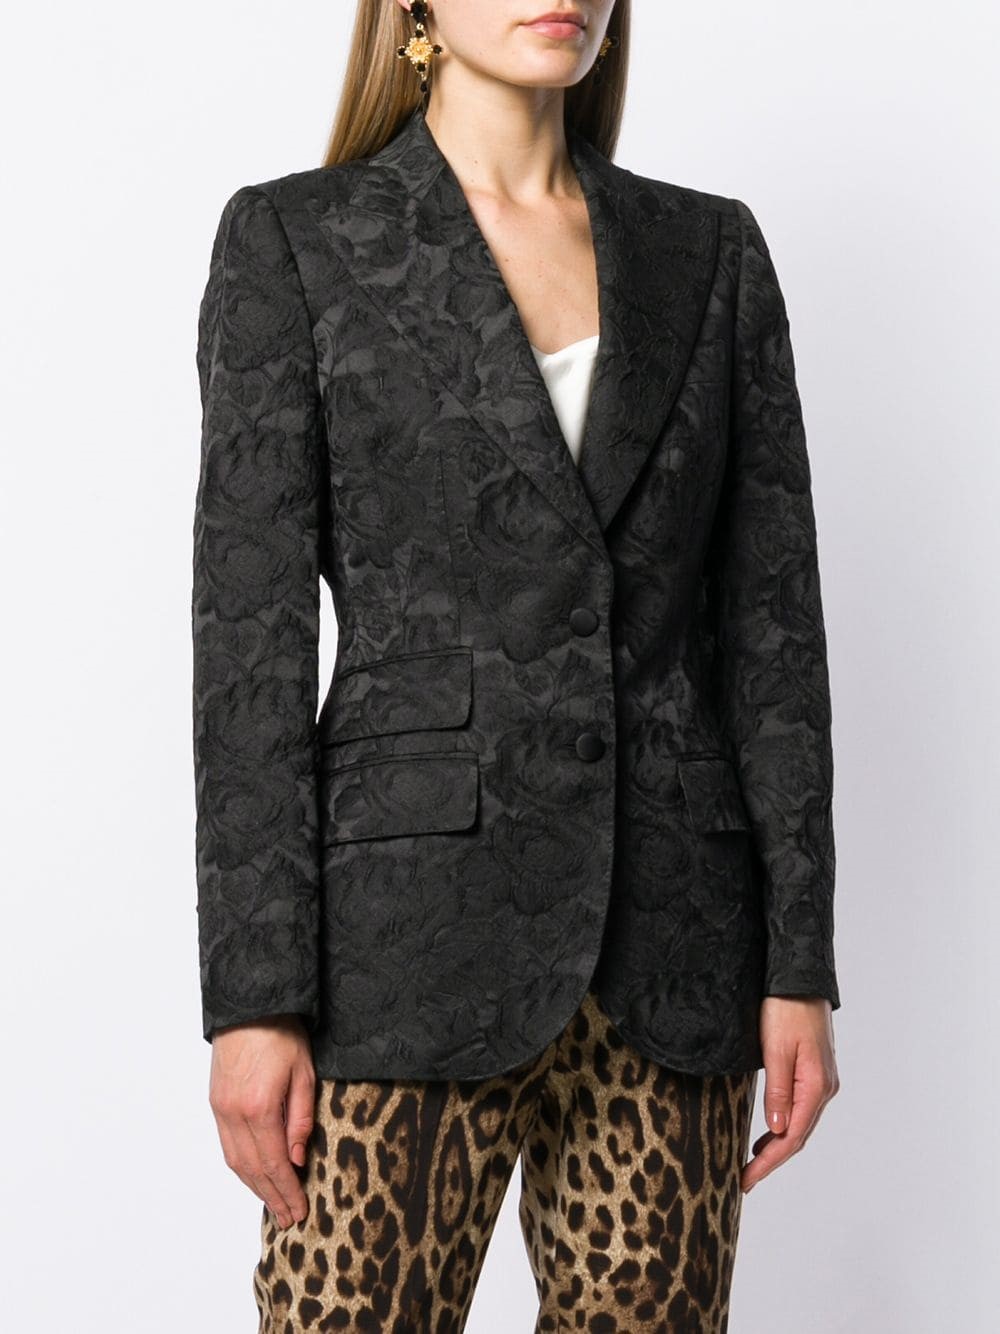 dolce & gabbana BROCADE JACKET available on montiboutique.com - 29494